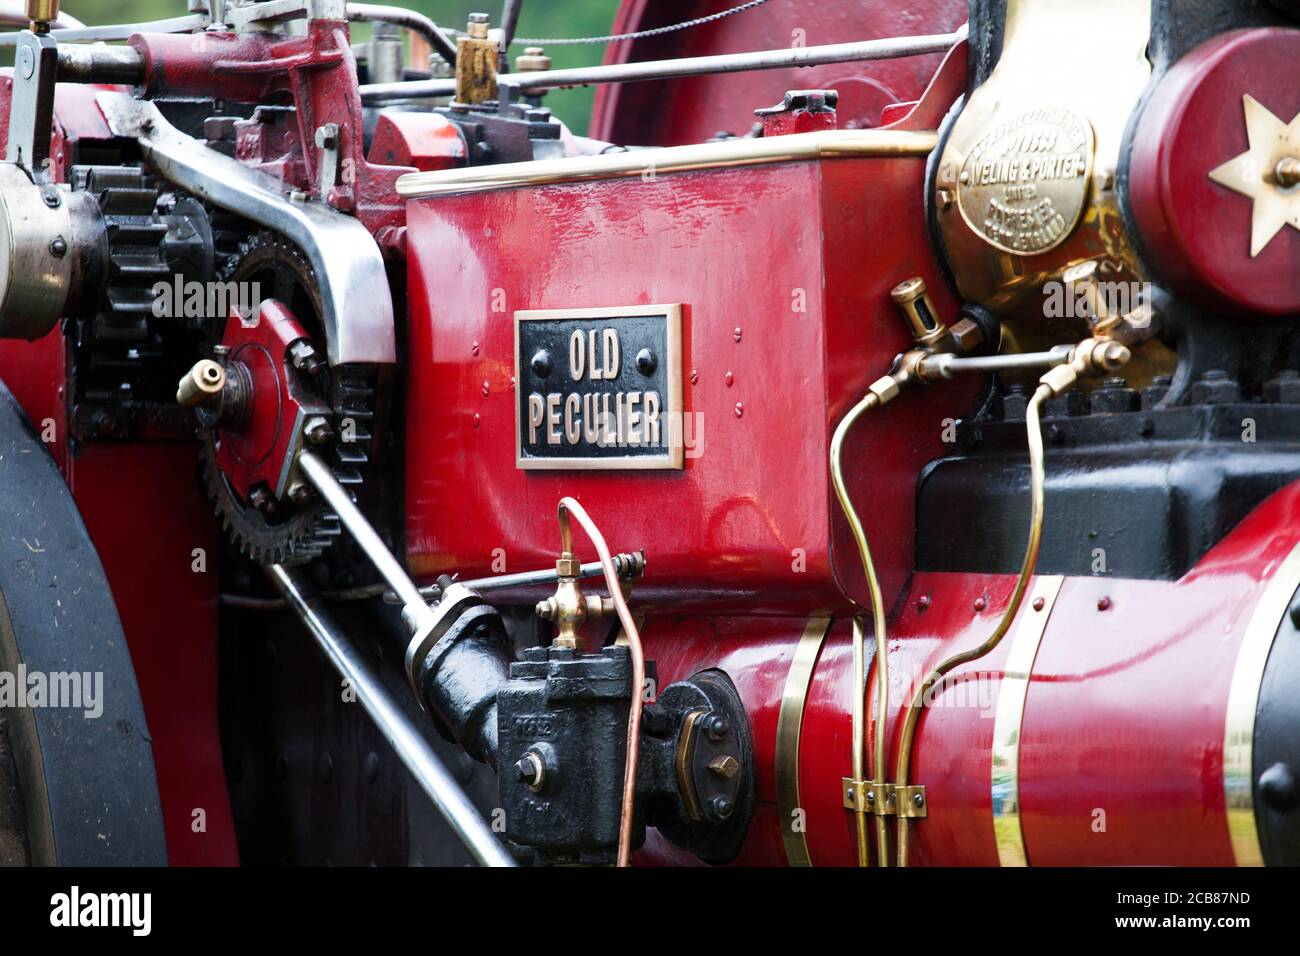 Old Peculier vintage steam engine detail Stock Photo